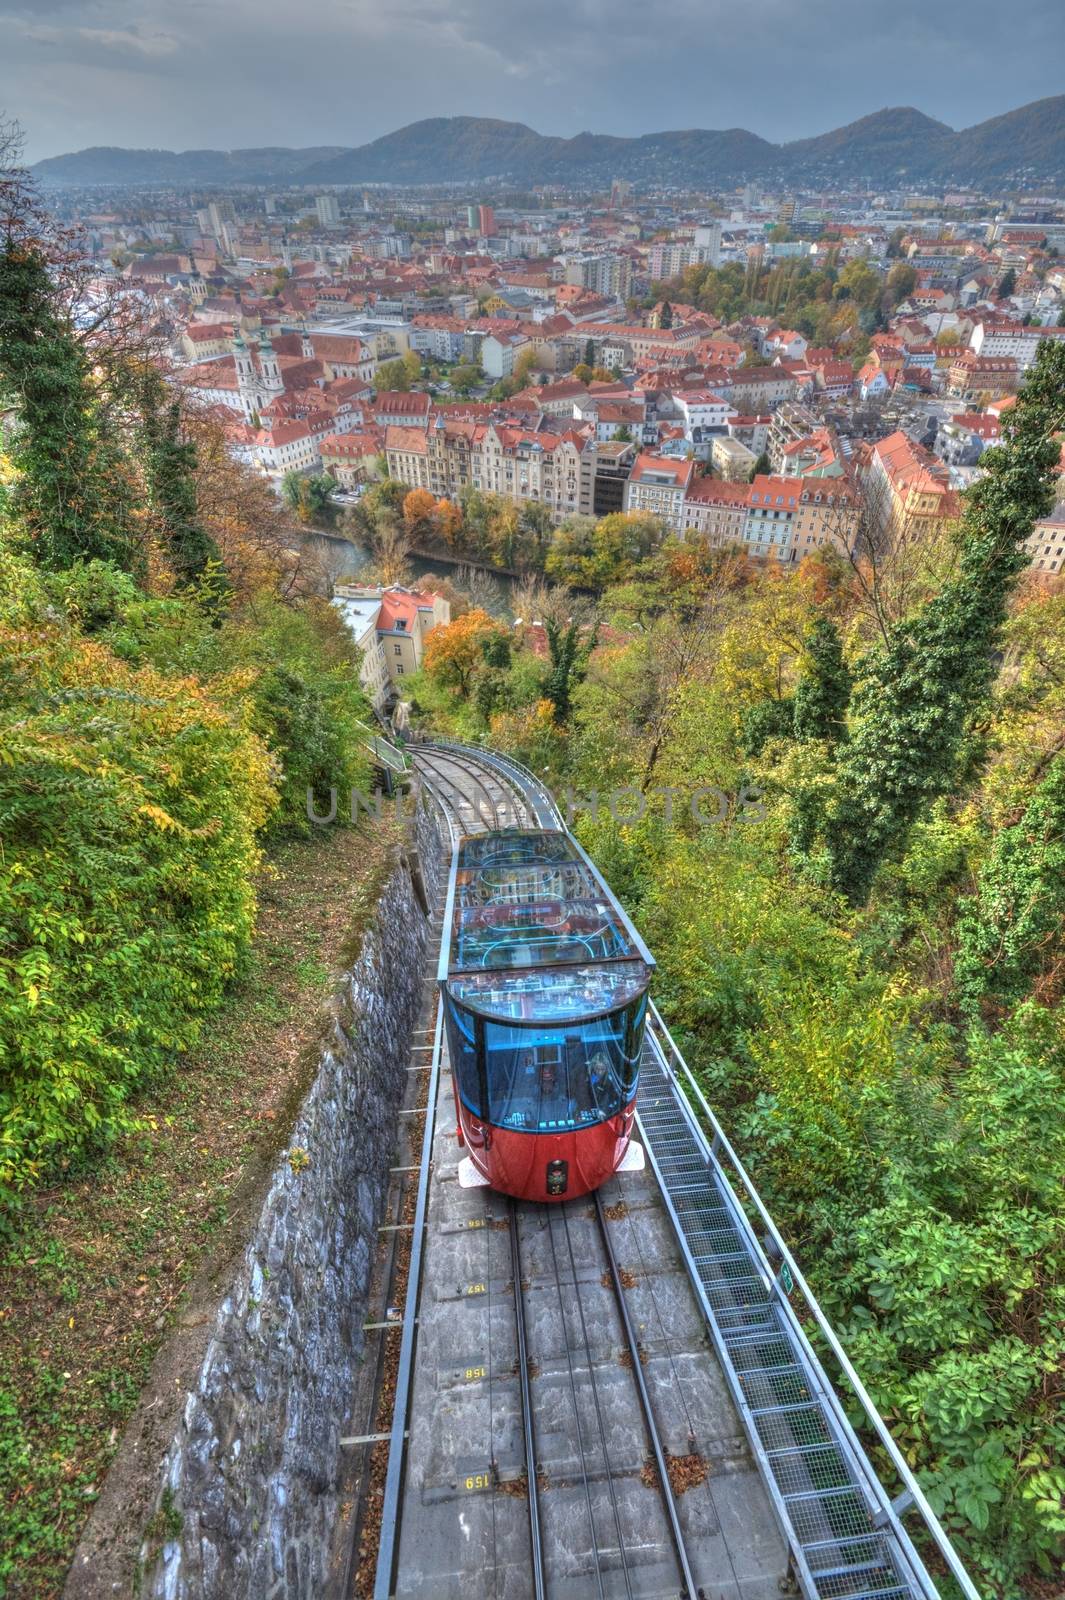 Red funicular in Graz, Austria by anderm